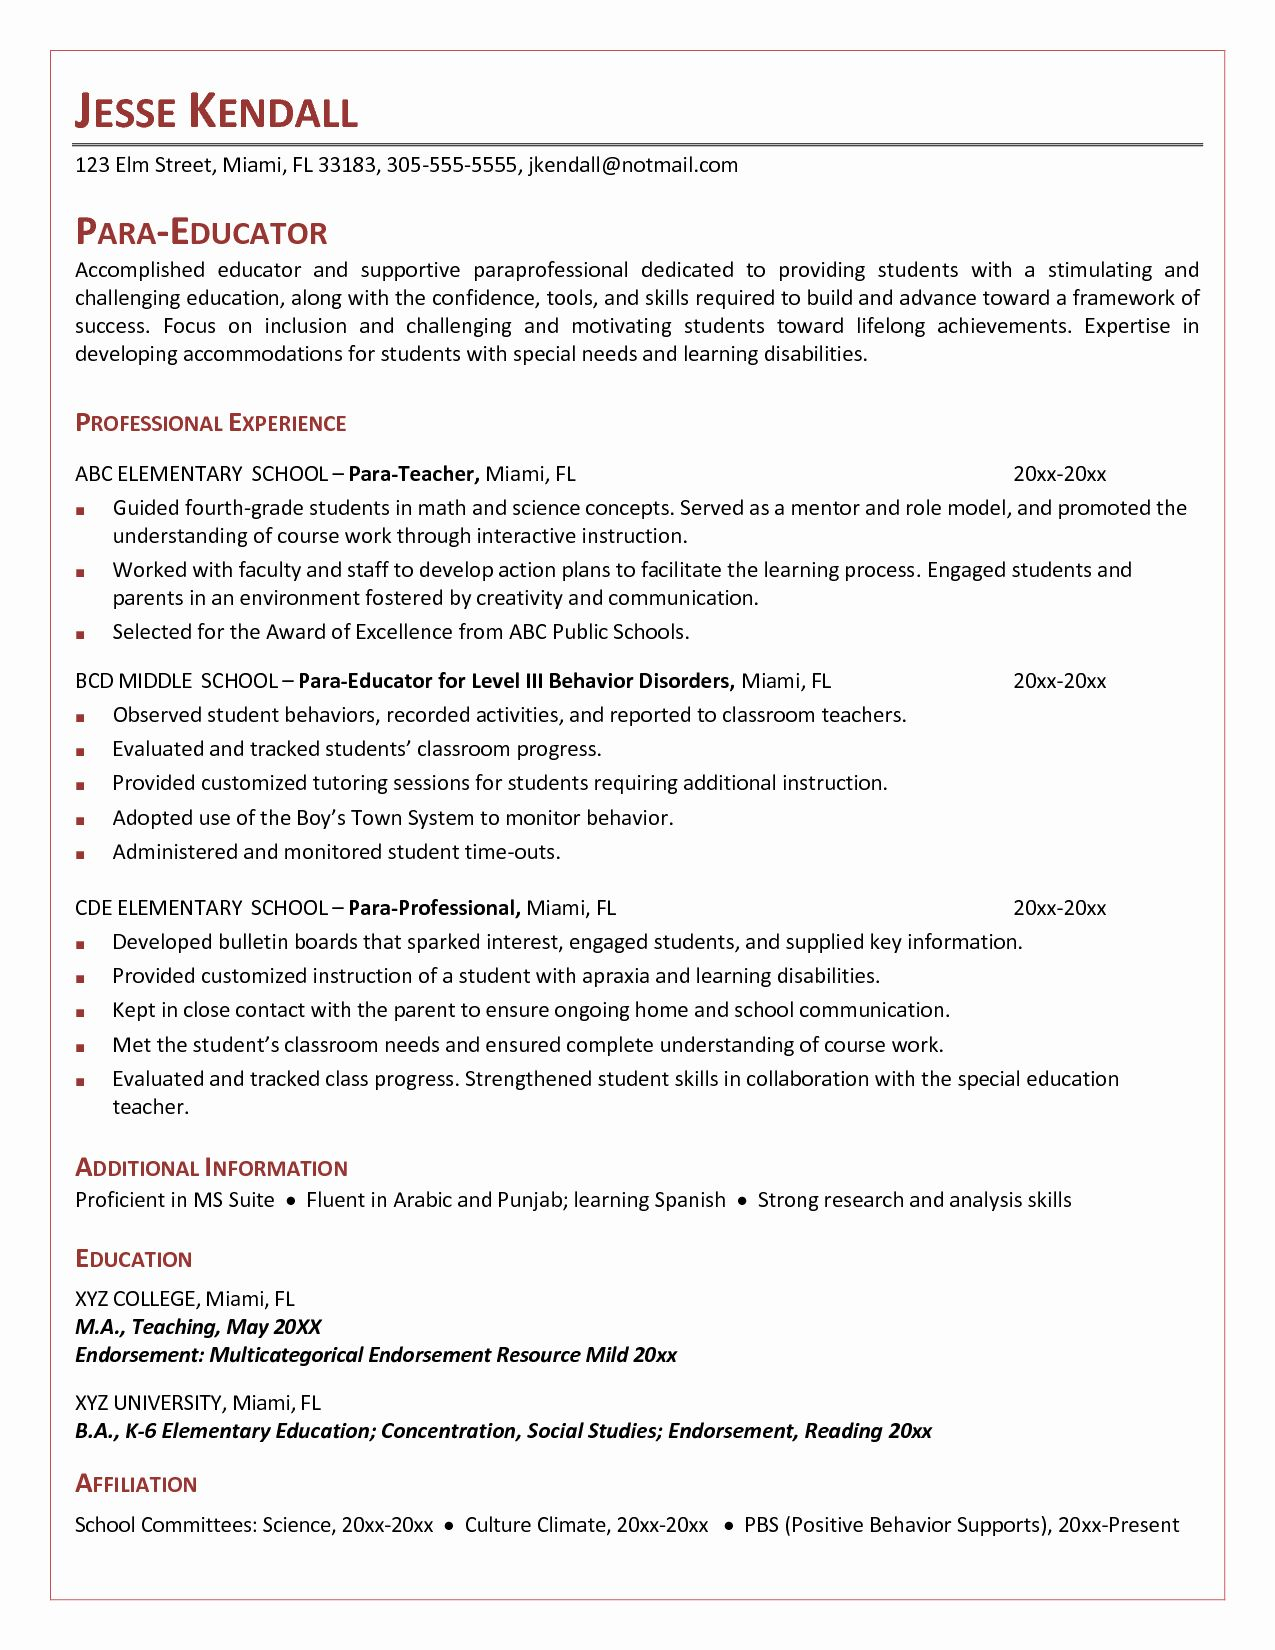 30 Letter Of Recommendation For Paraprofessional In 2020 in dimensions 1275 X 1650